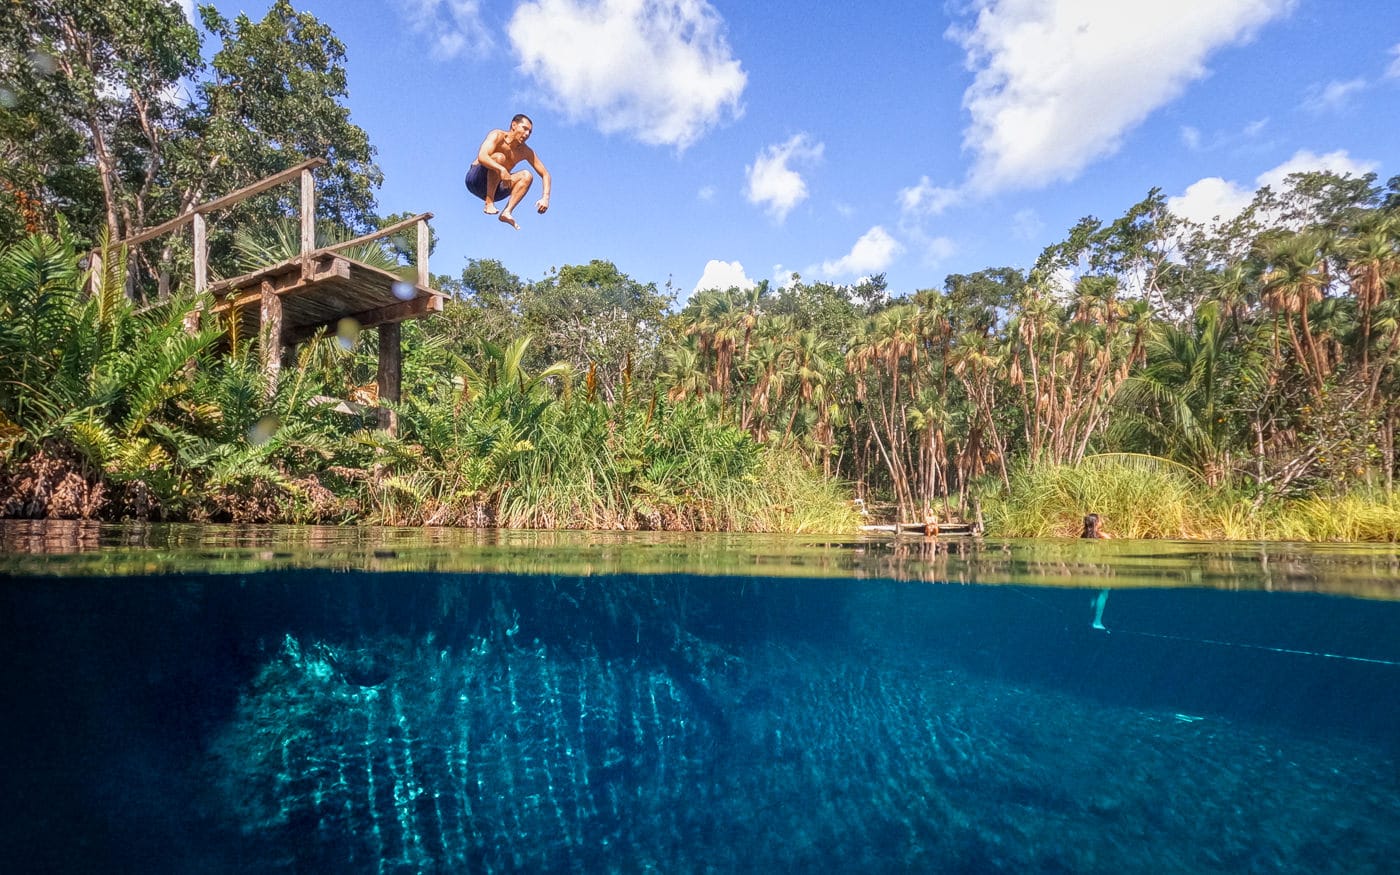 Jumping into blue water at Cenote Cristal Tulum